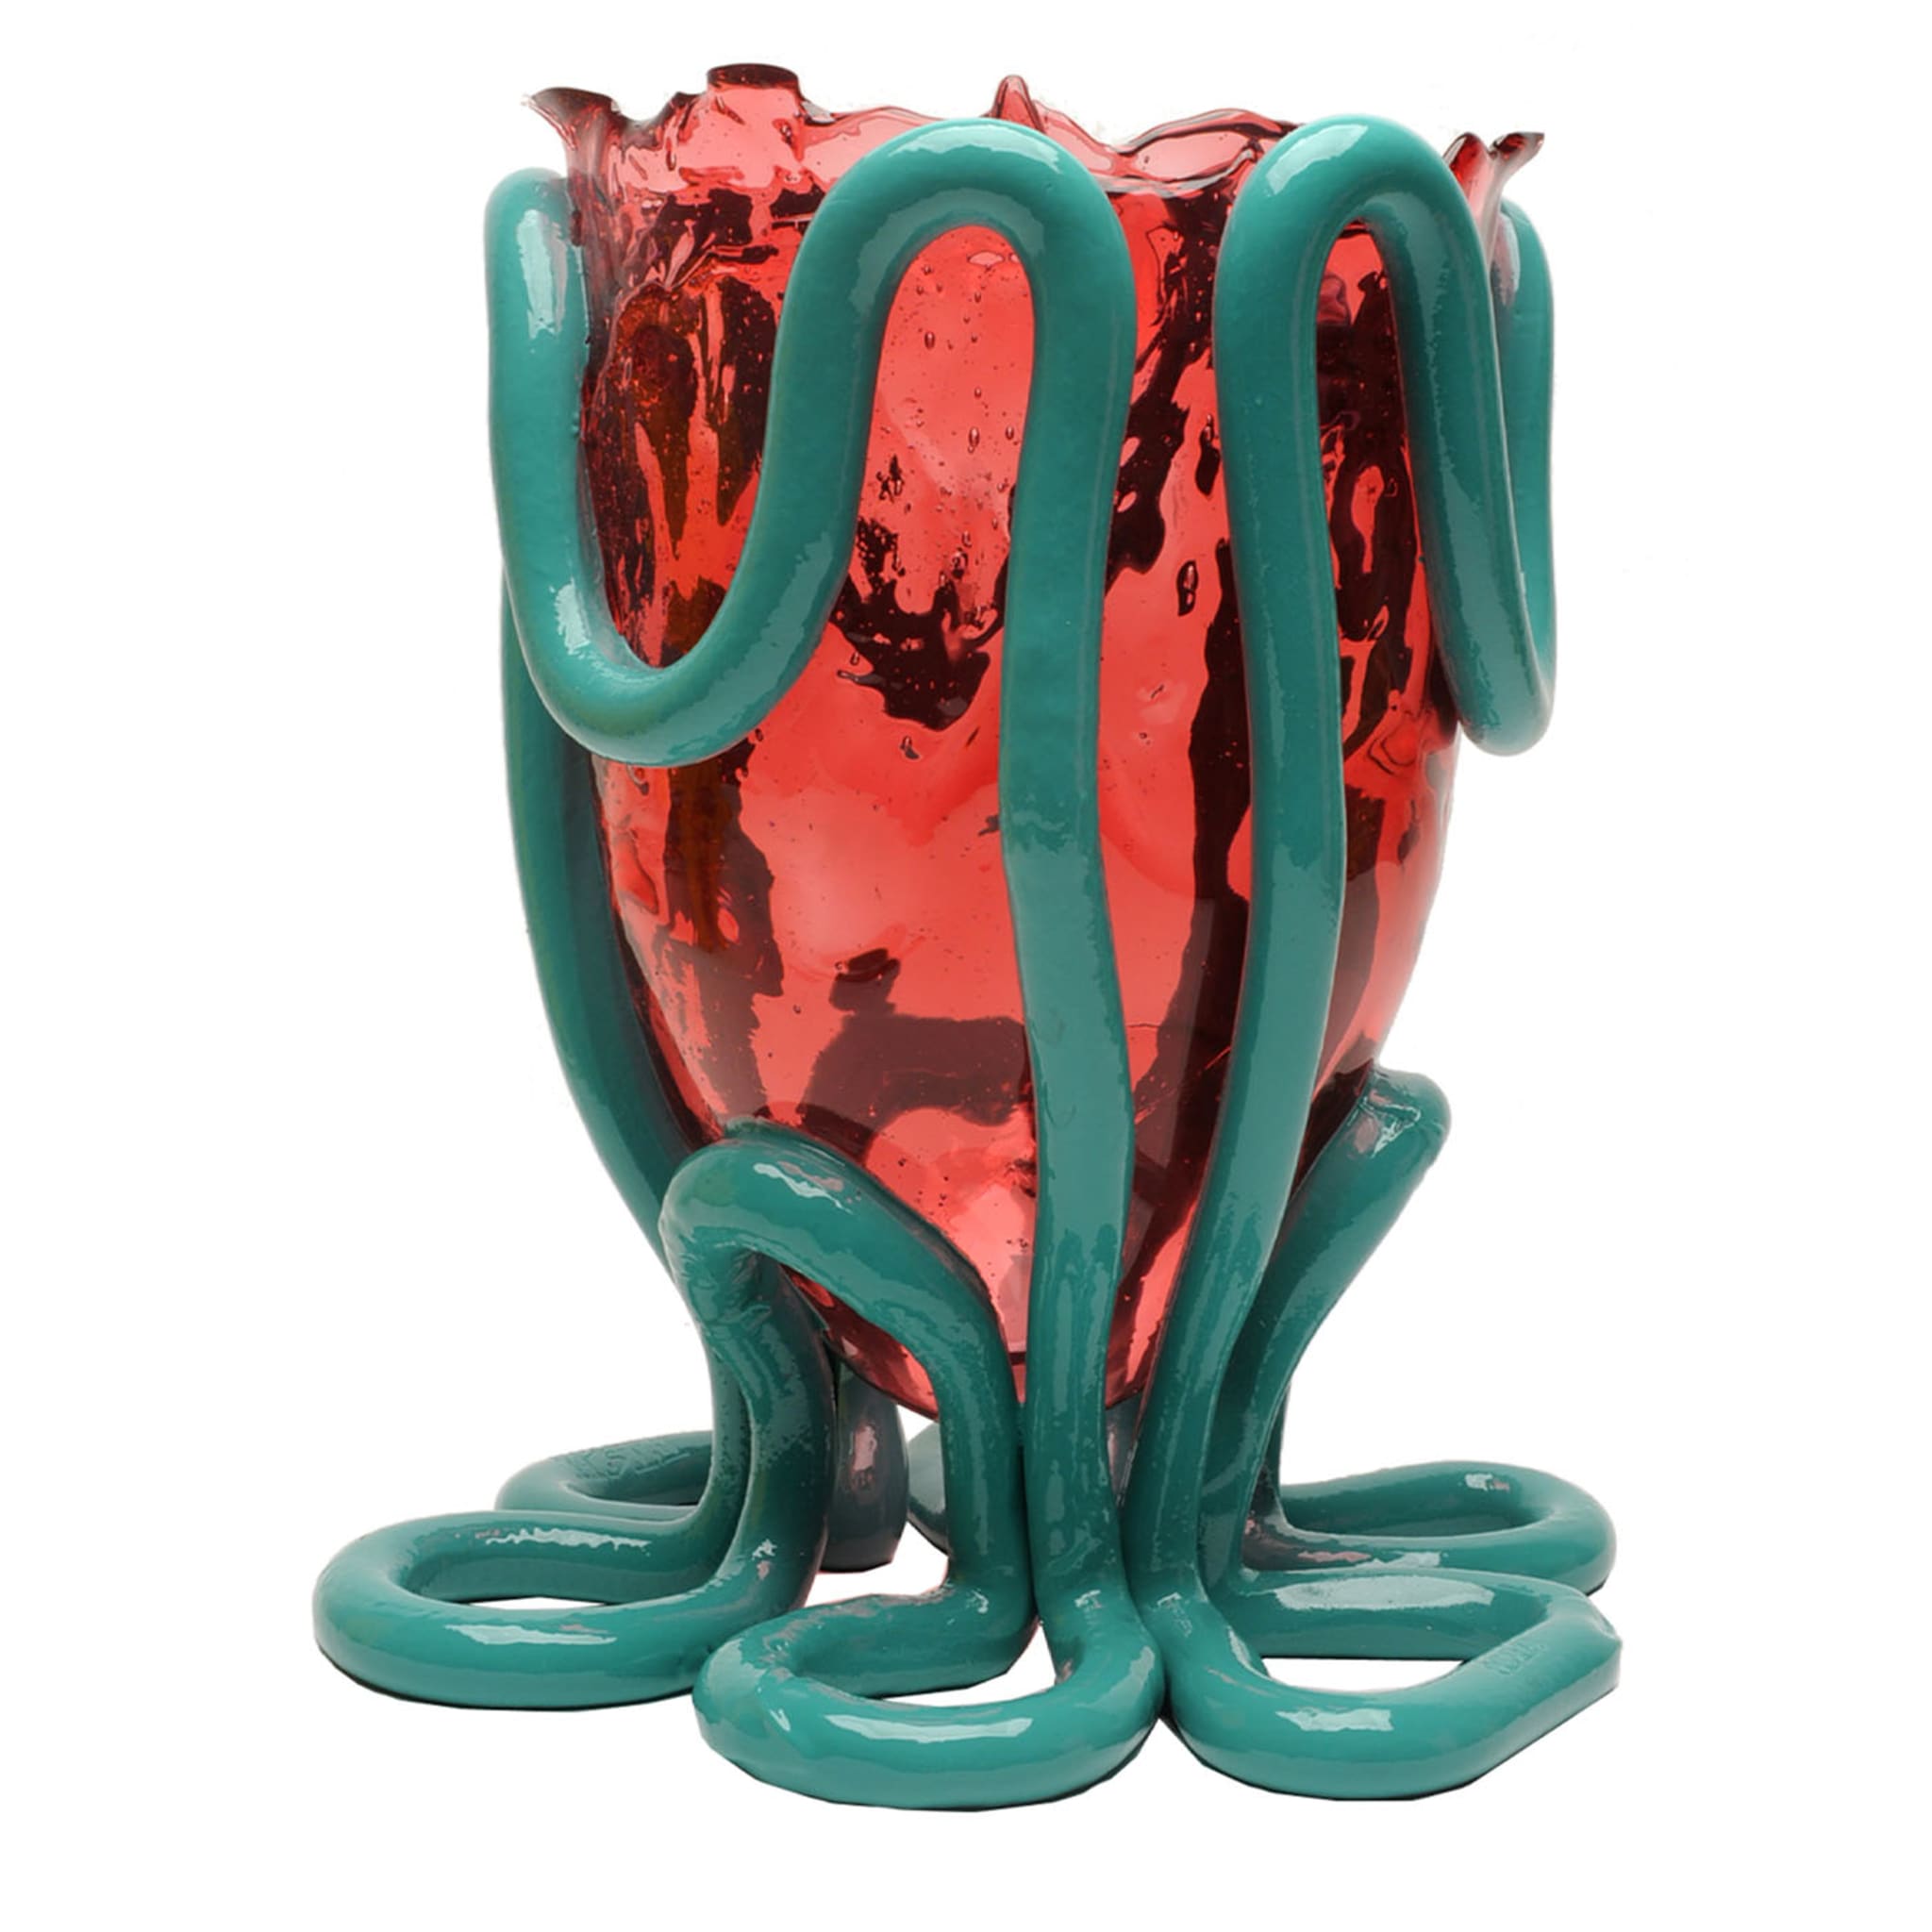 Indian Summer Vase L by Gaetano Pesce  - Alternative view 1